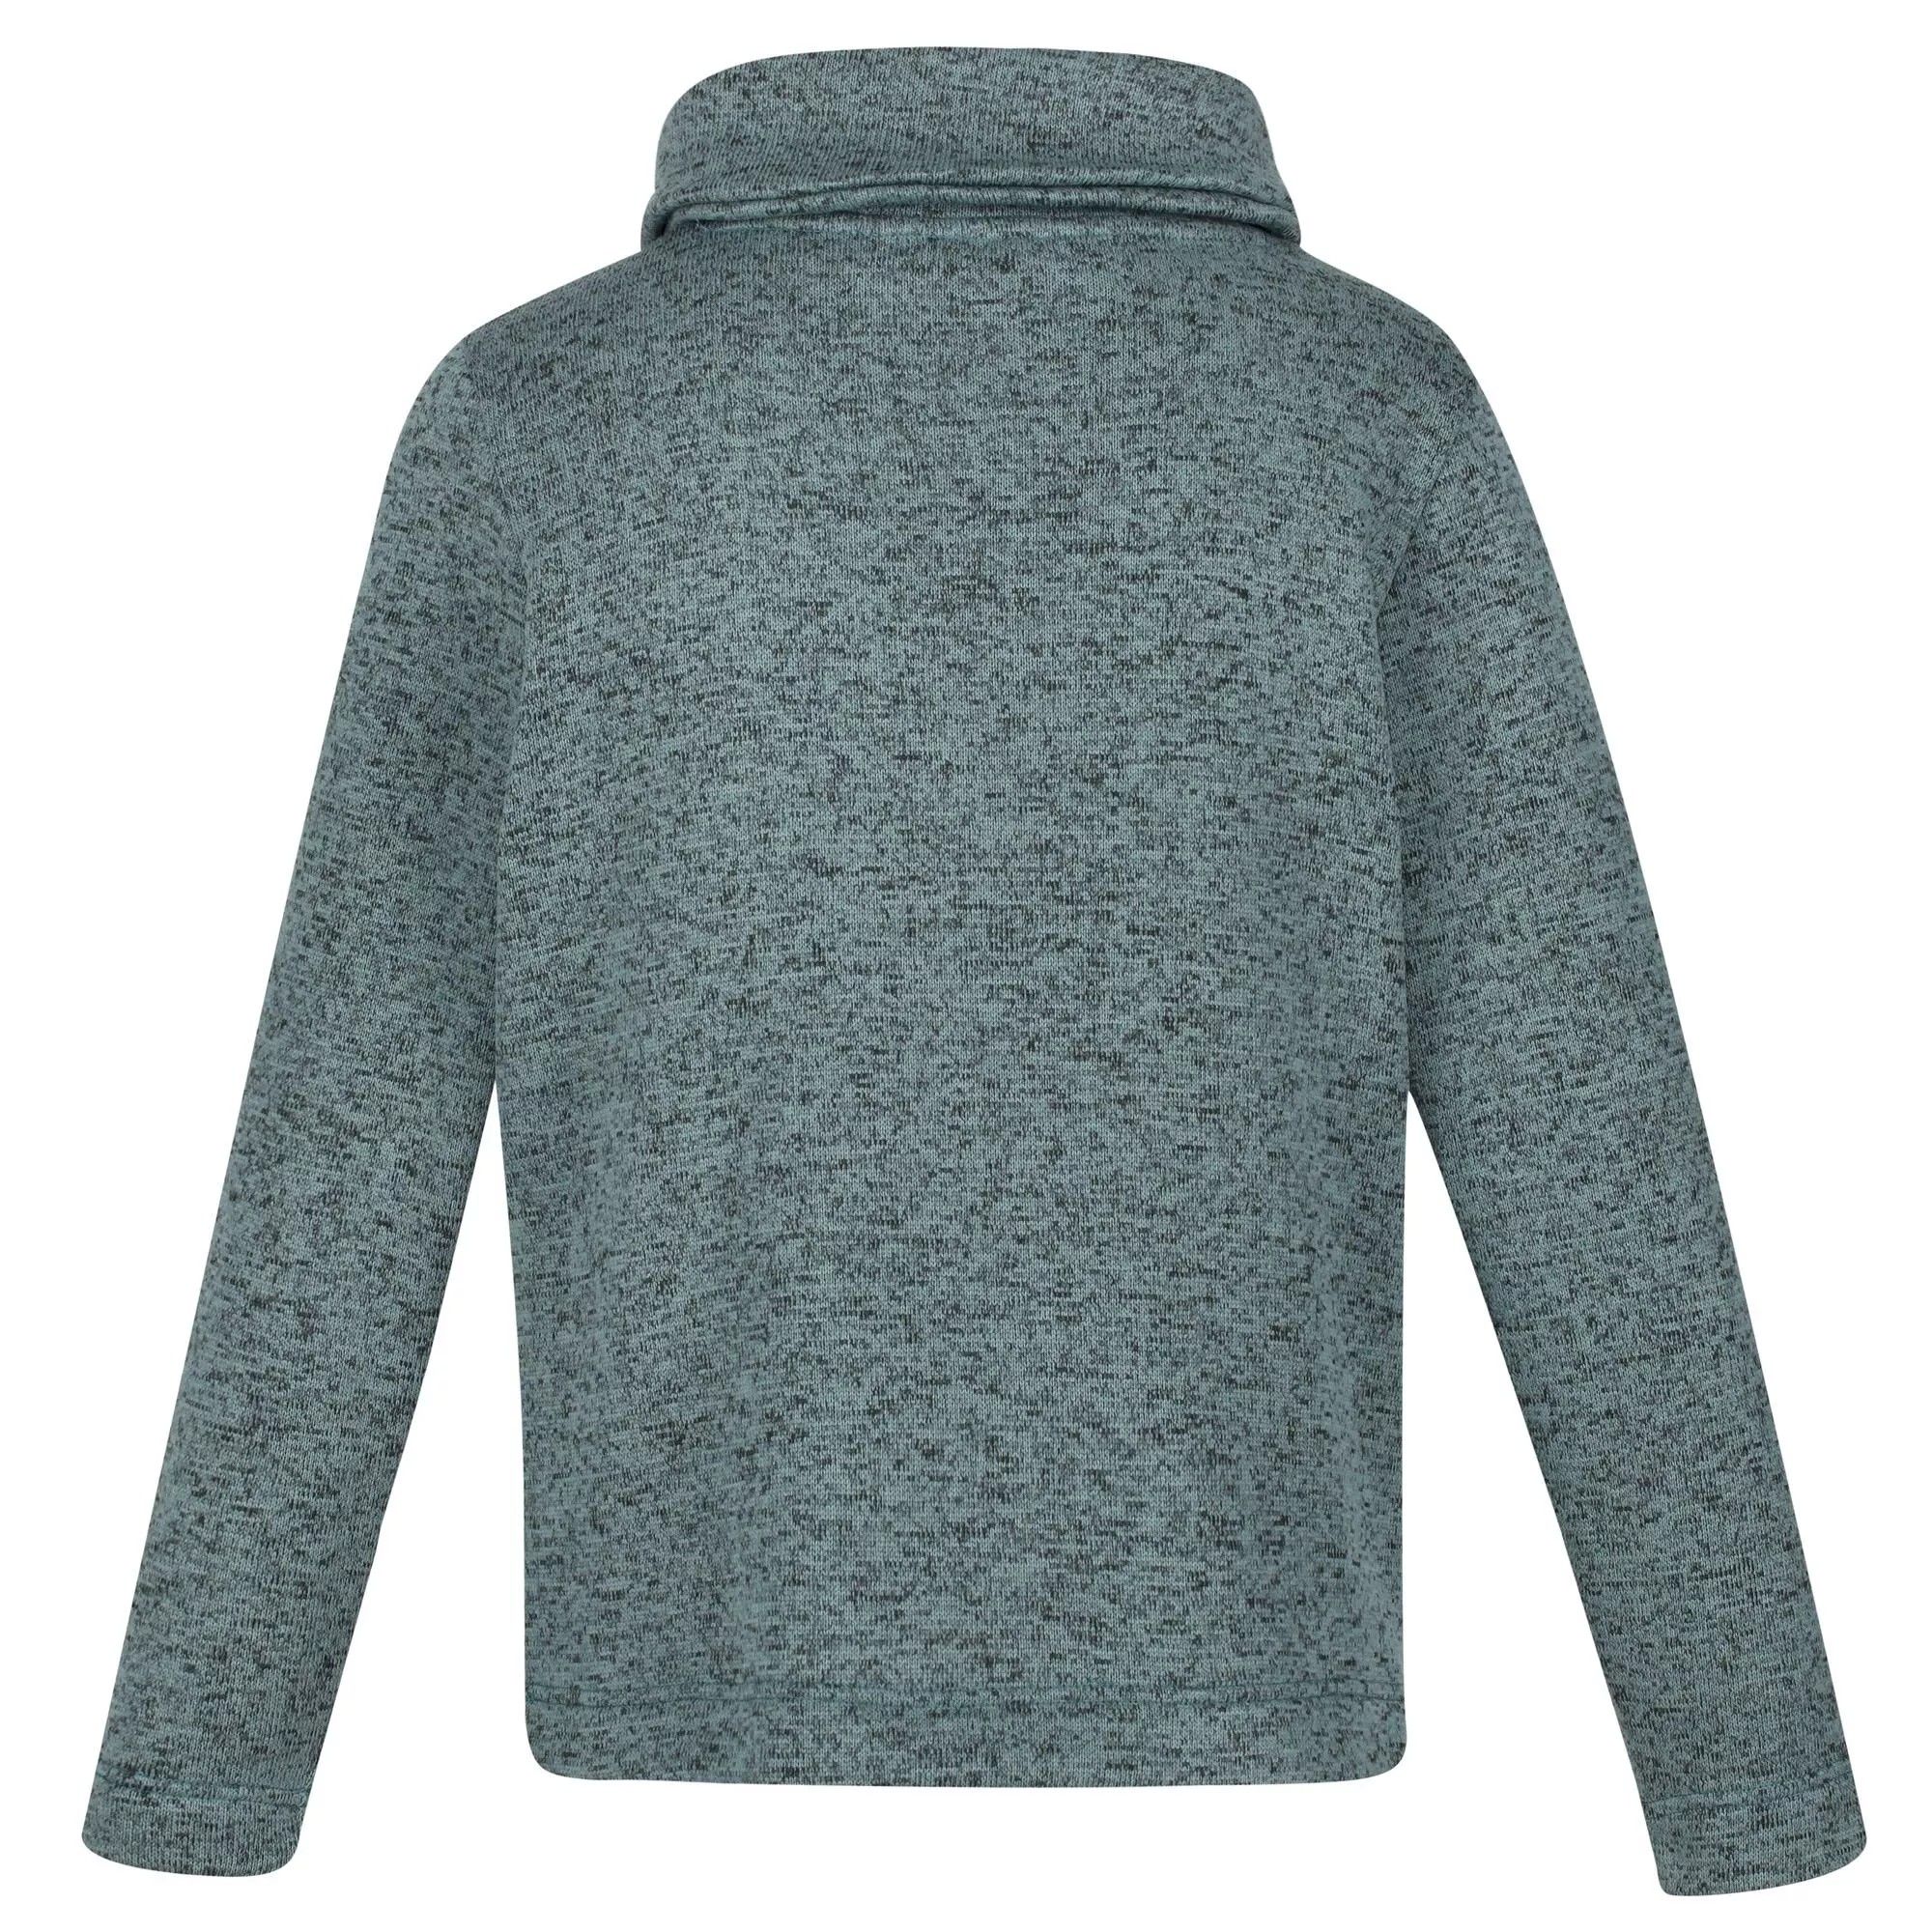 Material: 100% Polyester. Fabric: Fleece, Knitted. 250gsm. Design: Plain. Fabric Technology: Durable. Neckline: Cowl Neck. Sleeve-Type: Long-Sleeved. Fastening: Pull Over. Skin-Friendly.